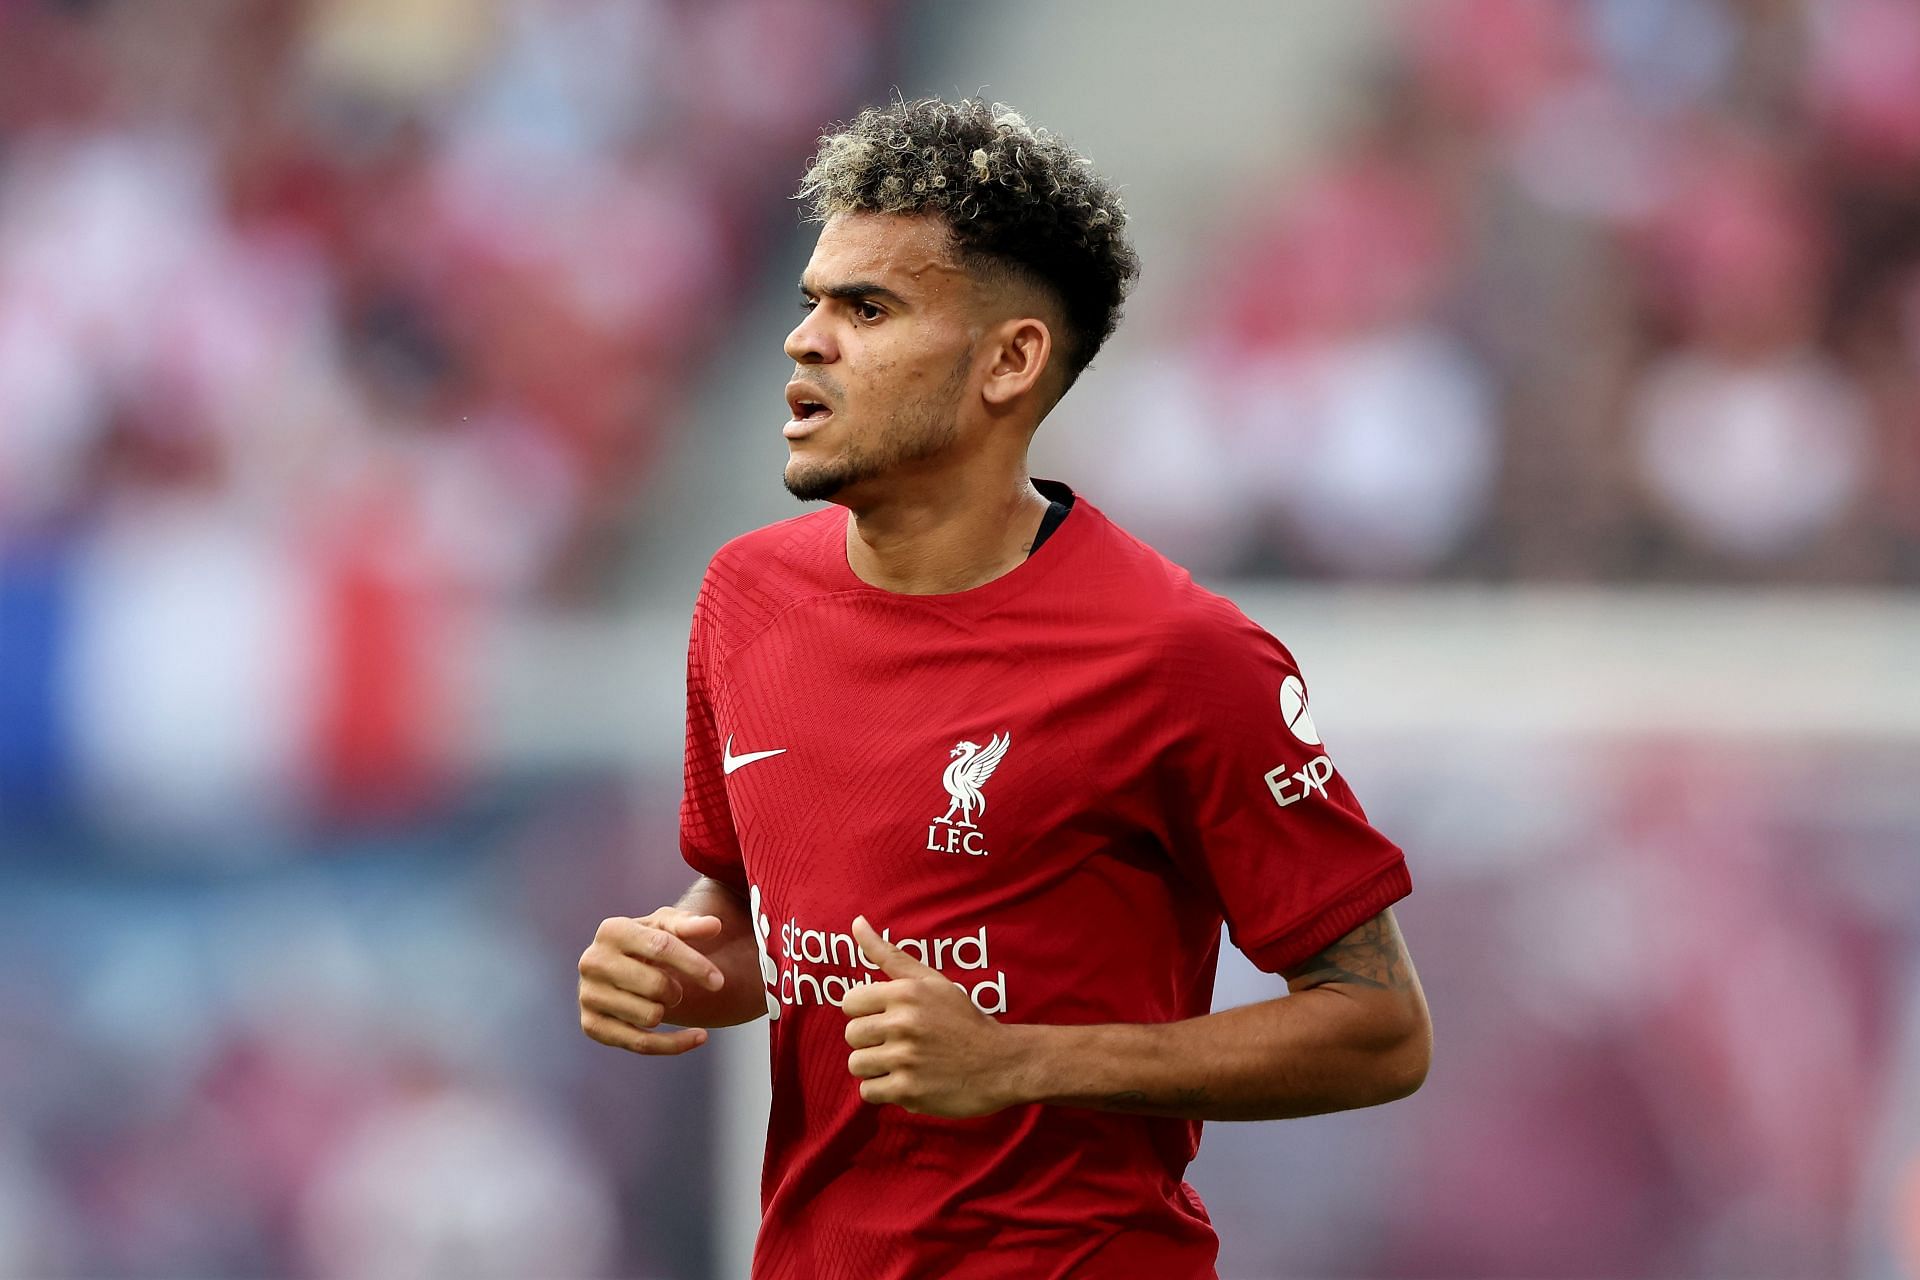 Luis Diaz is off to a promising start with Liverpool